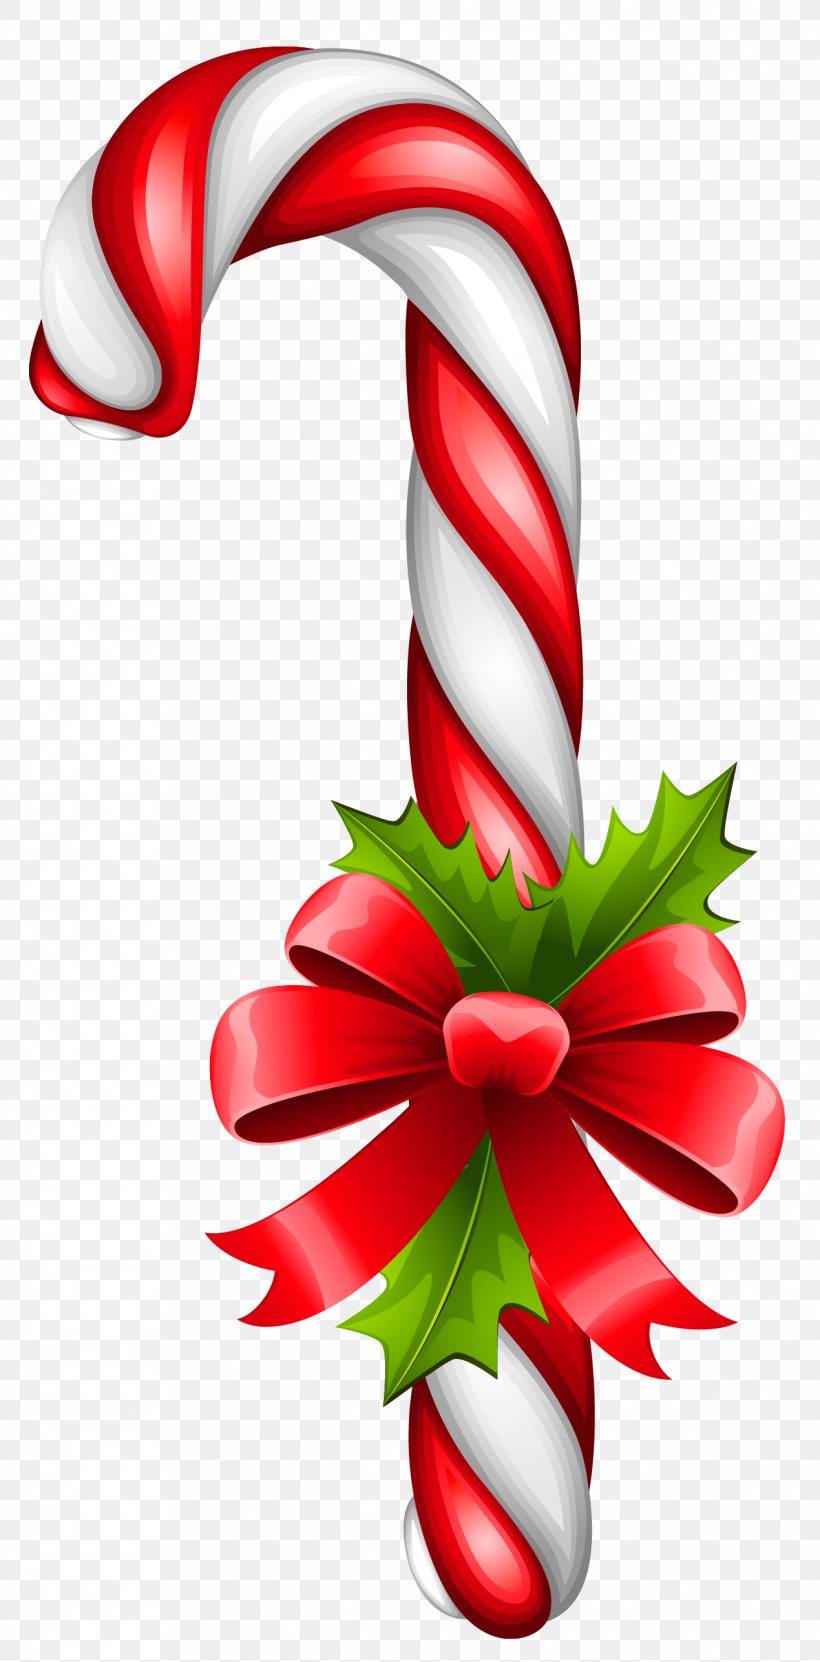 Candy Cane Christmas Stick Candy, PNG, 1269x2573px, Candy Cane, Candy, Christmas, Christmas Decoration, Christmas Lights Download Free